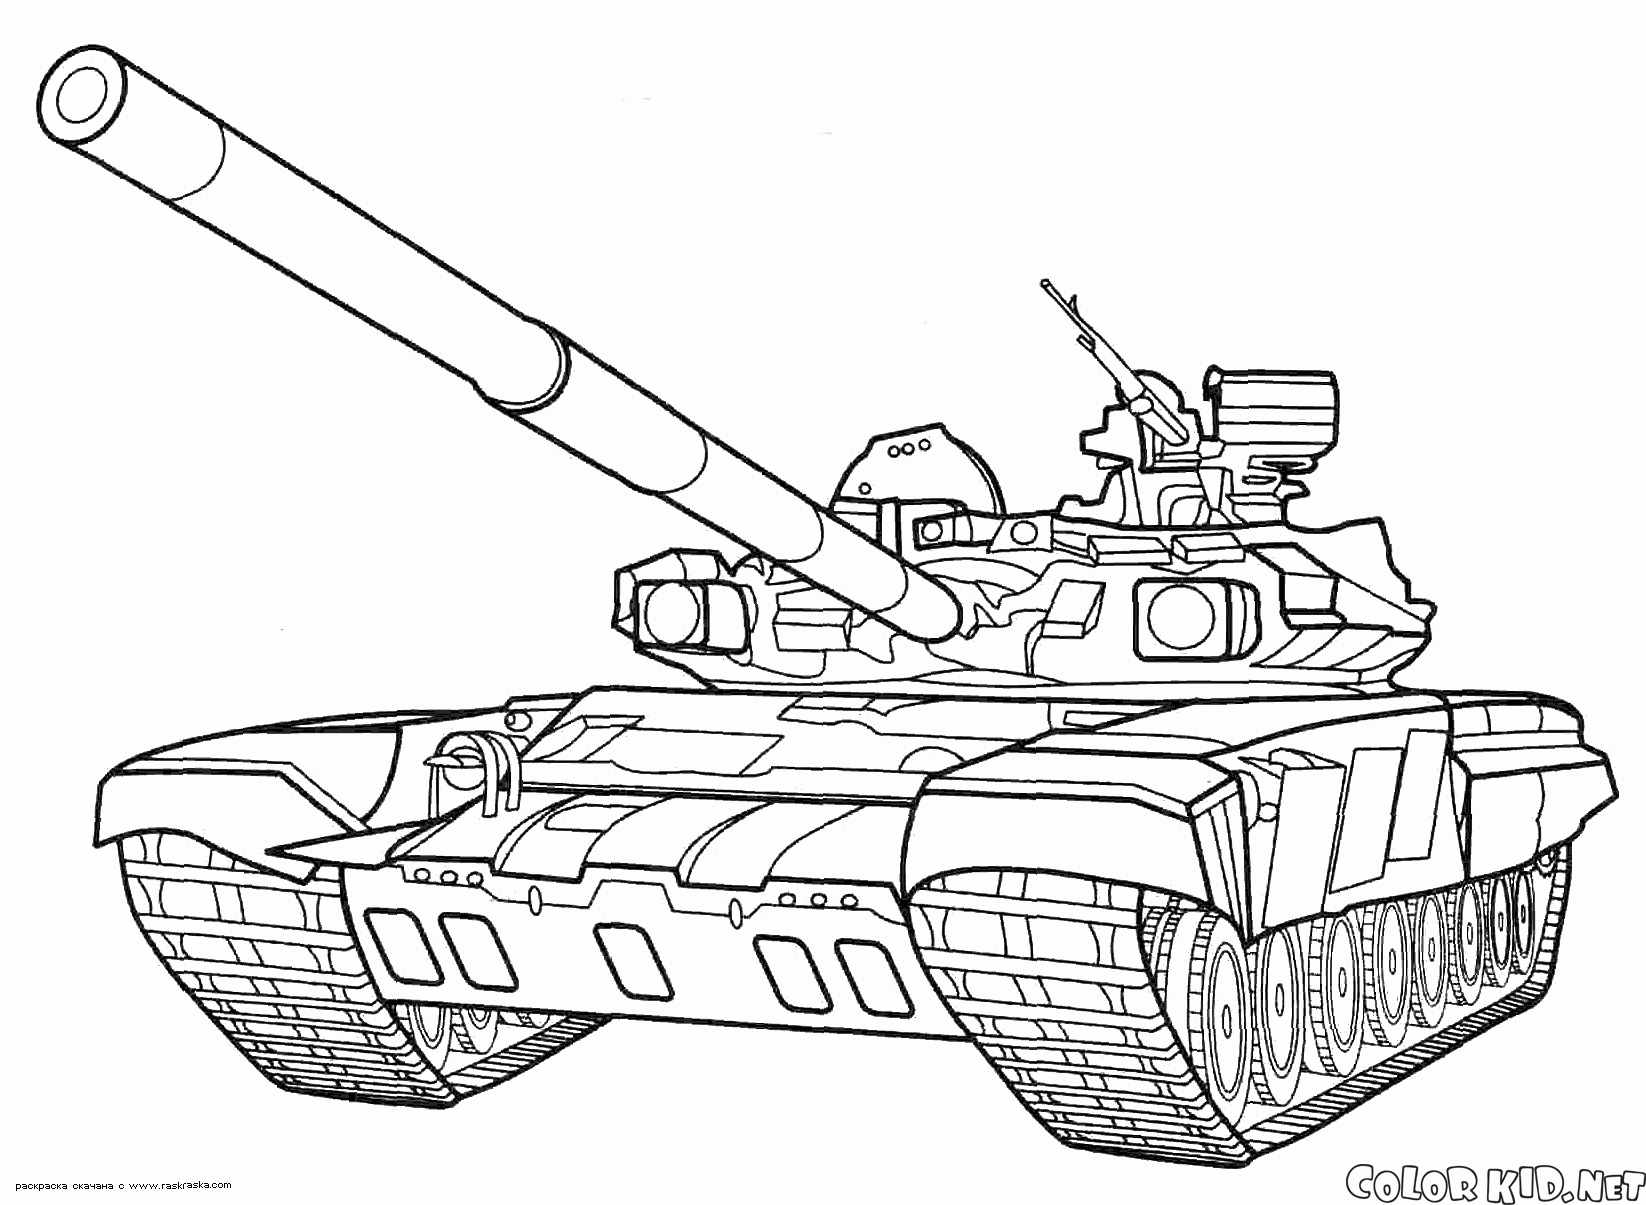 Coloring page - Chinese tanks